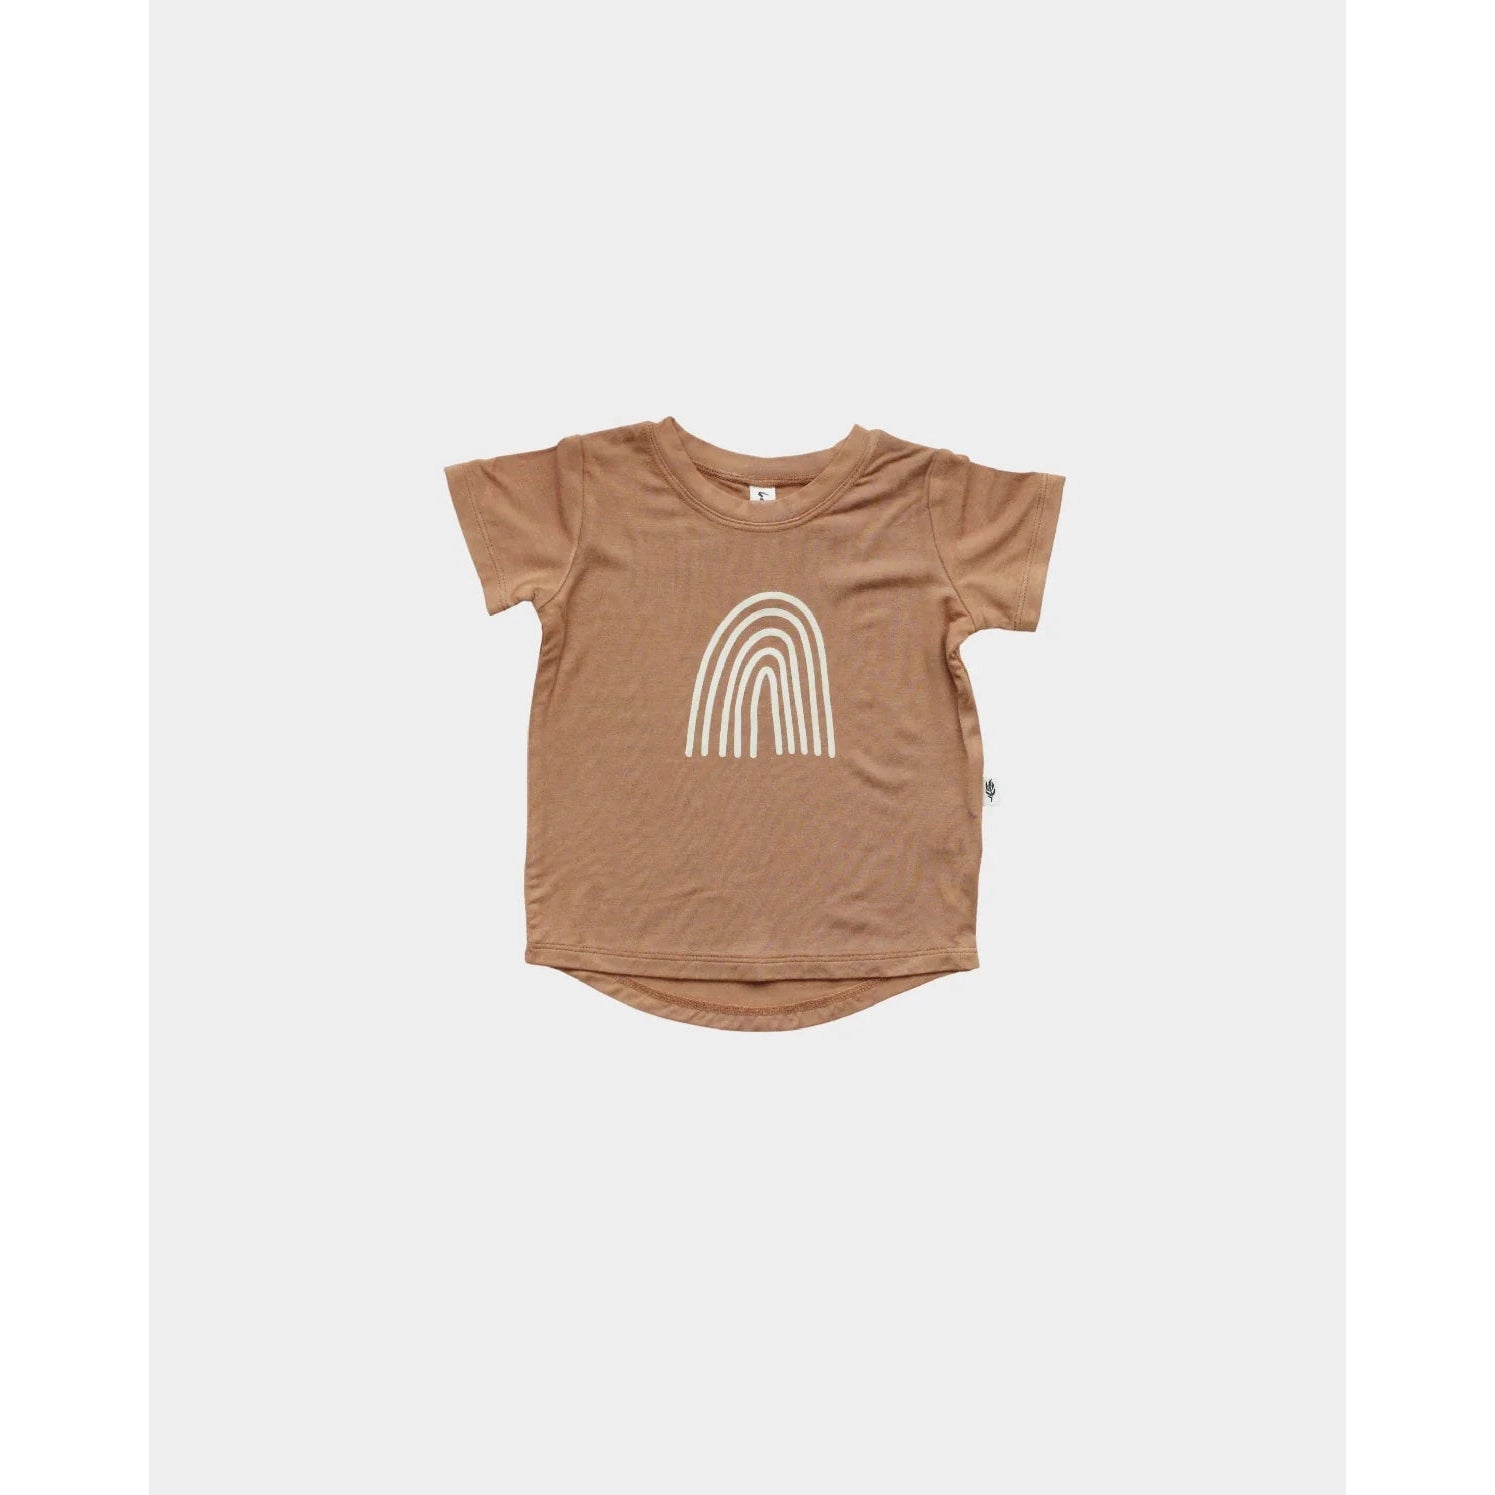 Baby Sprouts Rainbow Screen-Printed Tee-Baby Sprouts-Little Giant Kidz